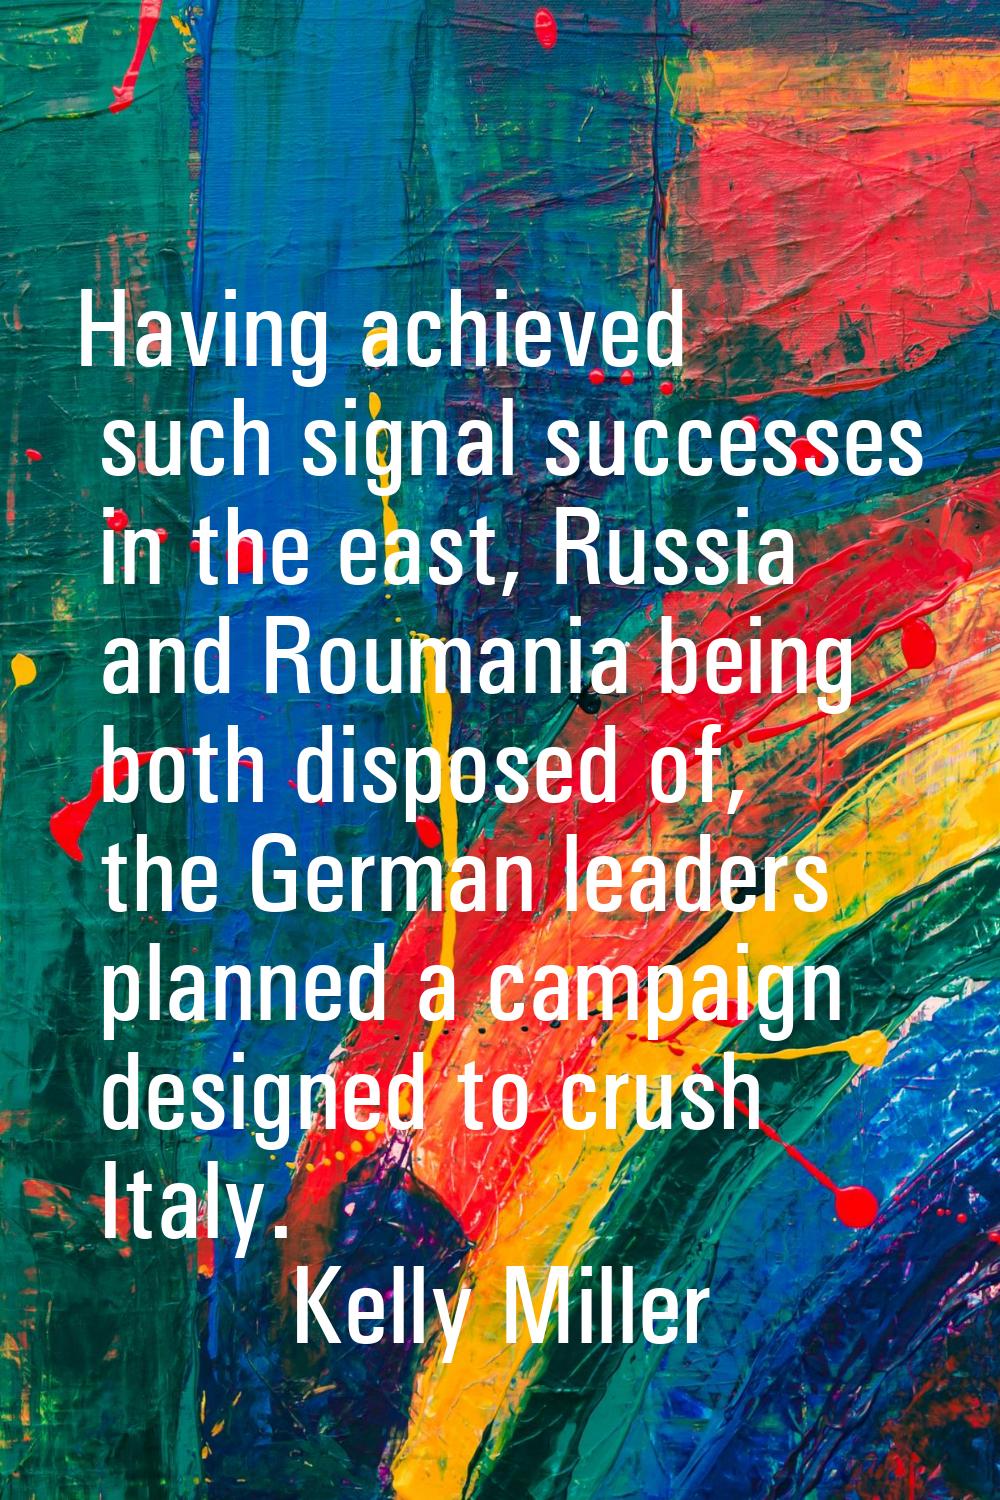 Having achieved such signal successes in the east, Russia and Roumania being both disposed of, the 